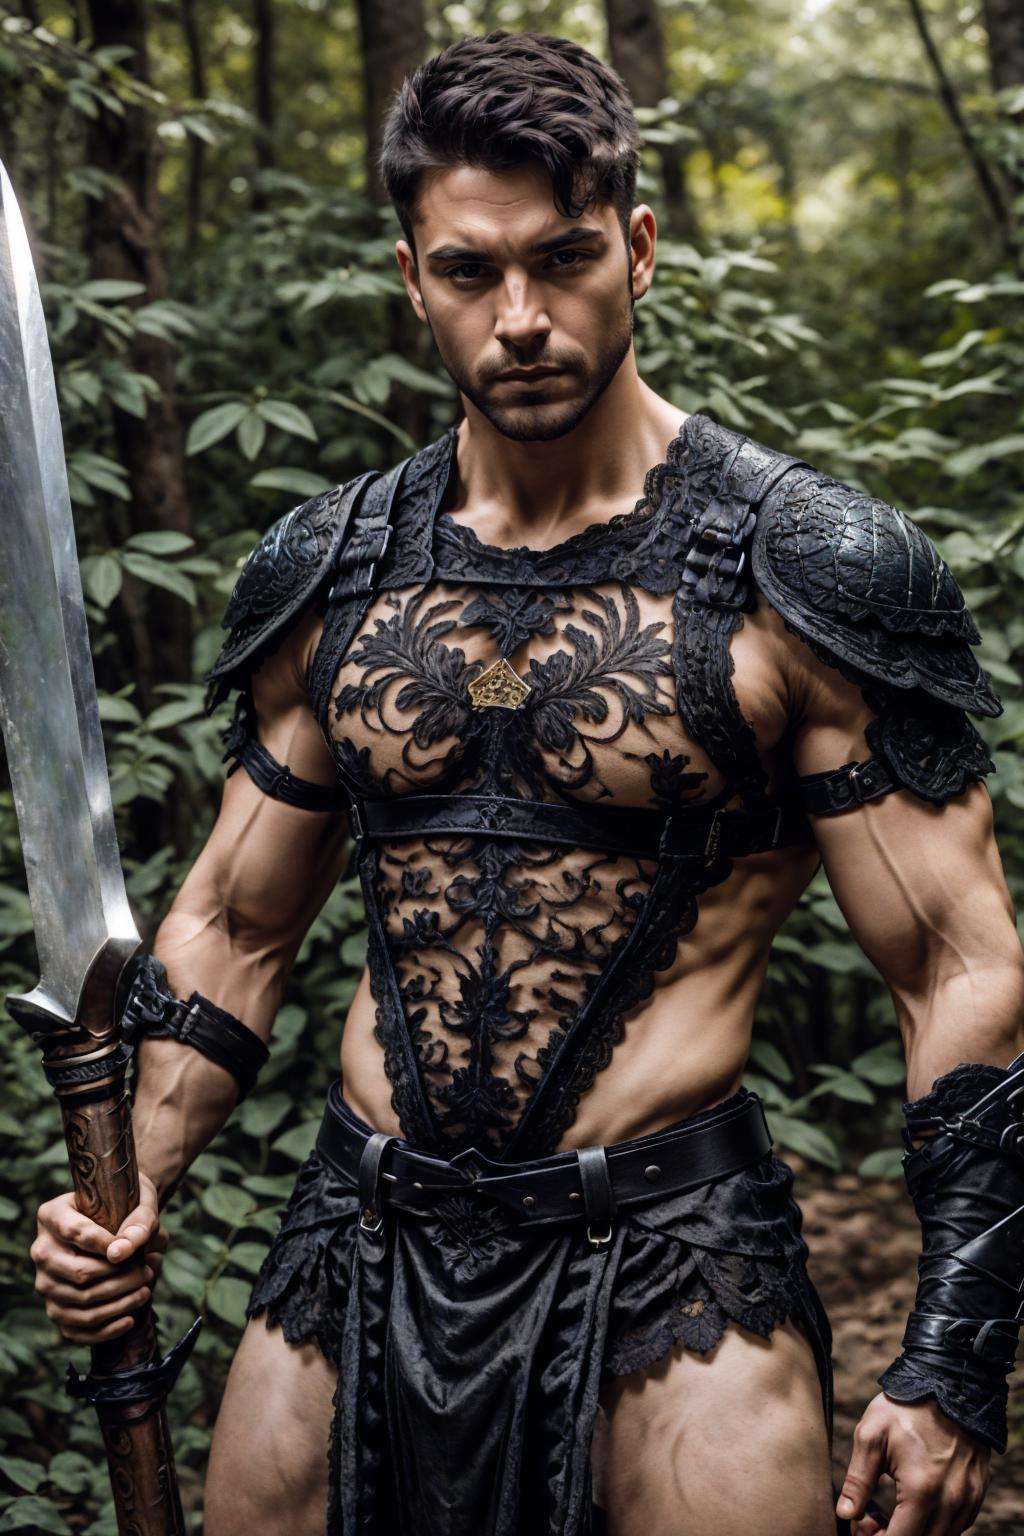 lac34rmor, wearing black lace barbarian armor, see-through, dynamic pose, fighting stance, close up, portrait, medieval fantasy background, nature, holding weapon, harness, realistic, masterpiece, intricate details, detailed background, depth of field, photo of a man,